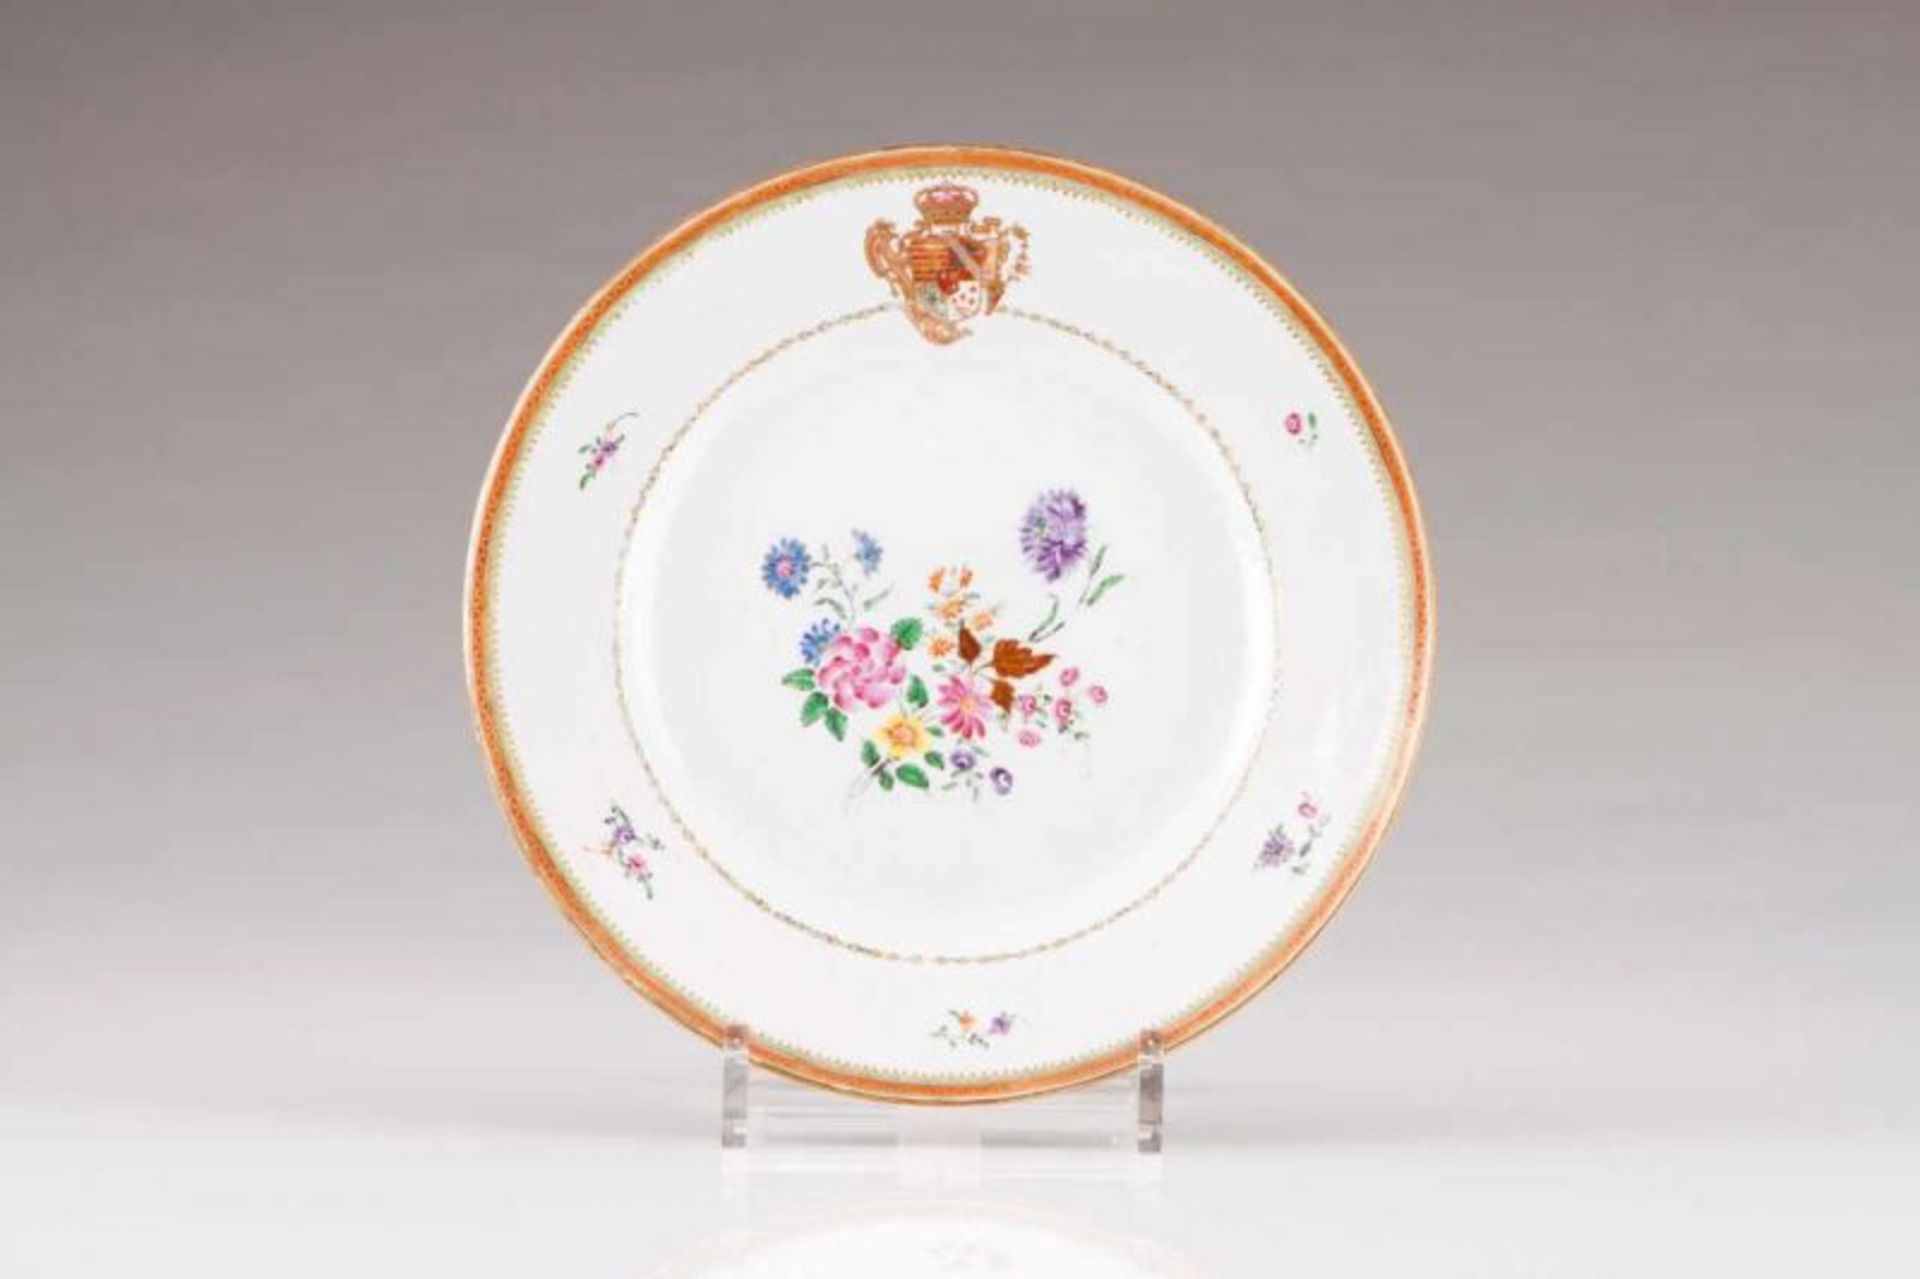 A plate Chinese export porcelain Polychrome and gilt Famille Rose decoration bearing coat-of-arms